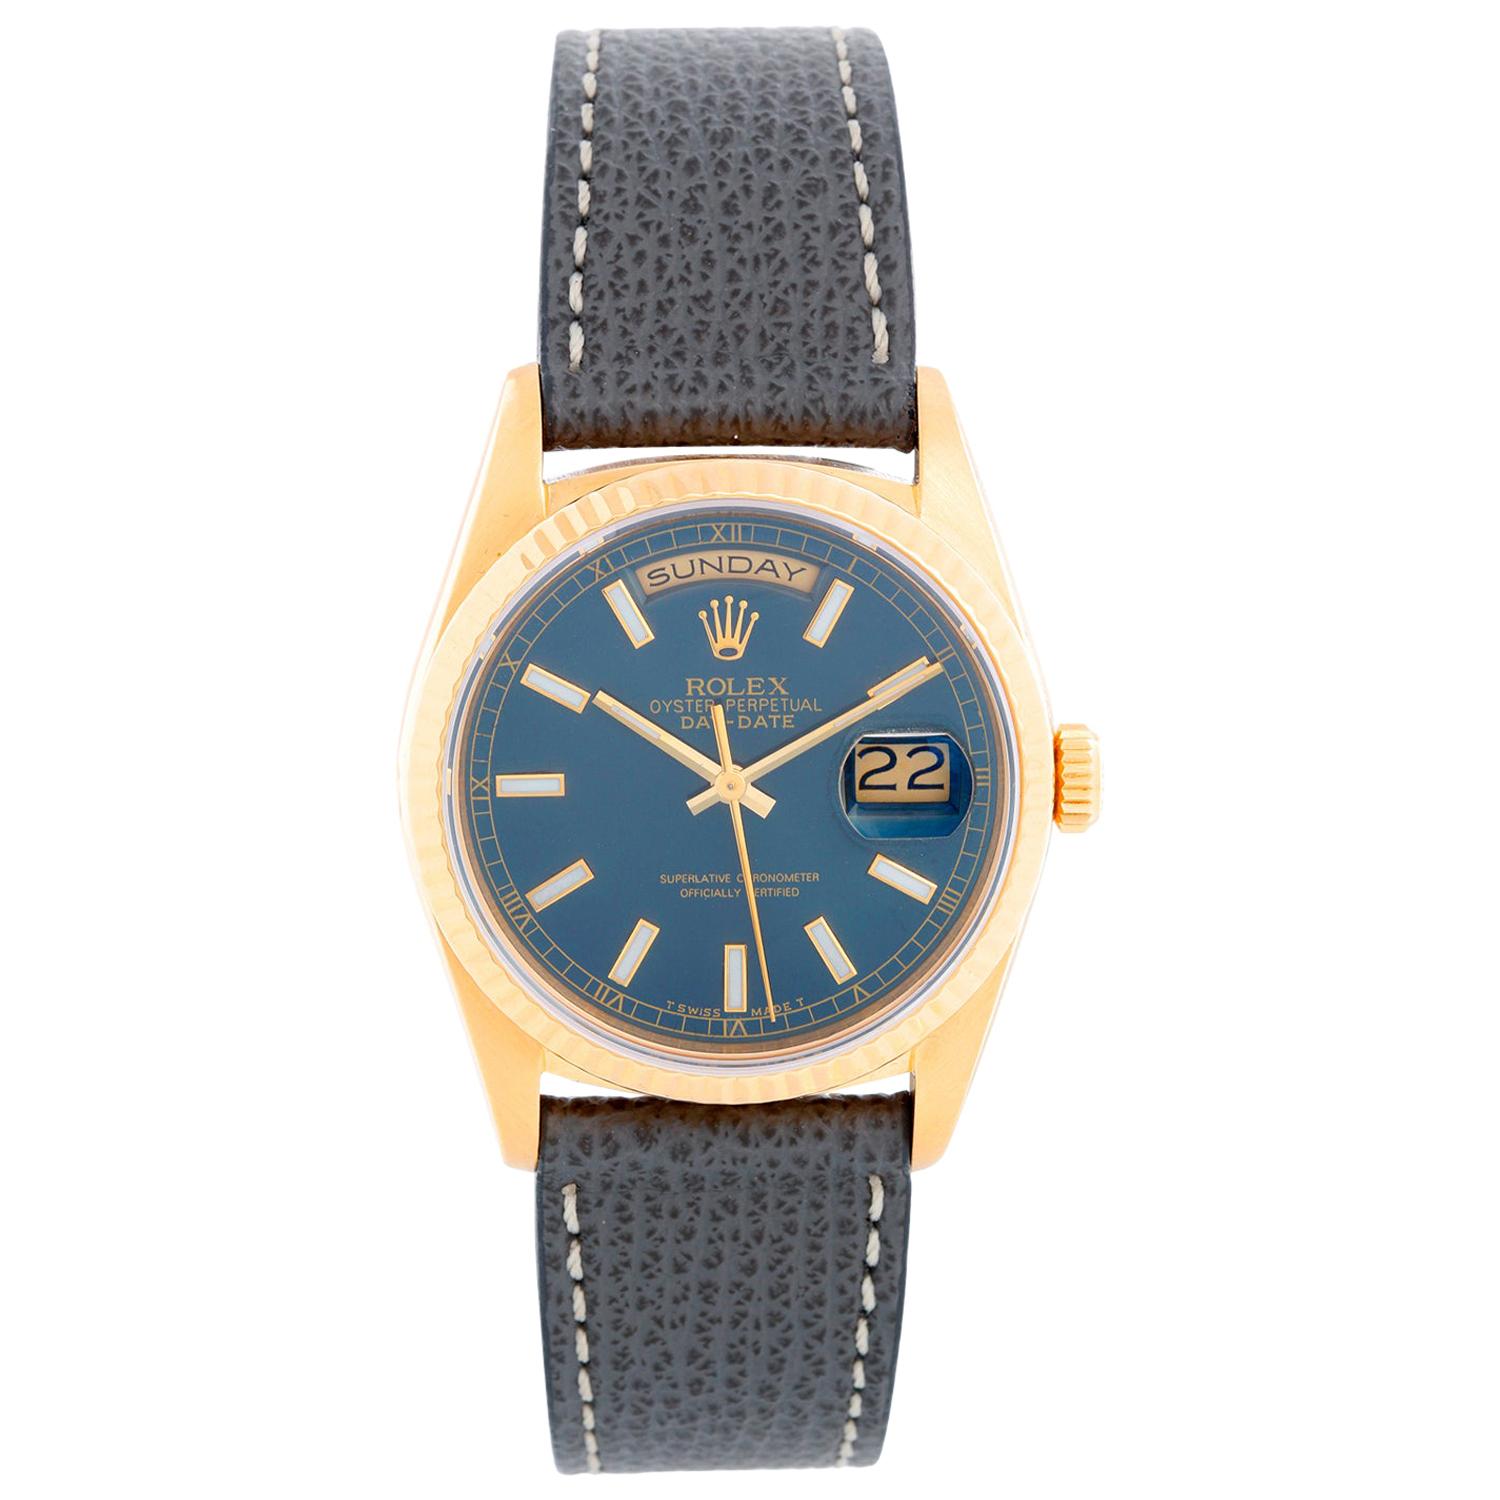 Men's Gold Rolex President Day-Date on a Strap Watch 18238